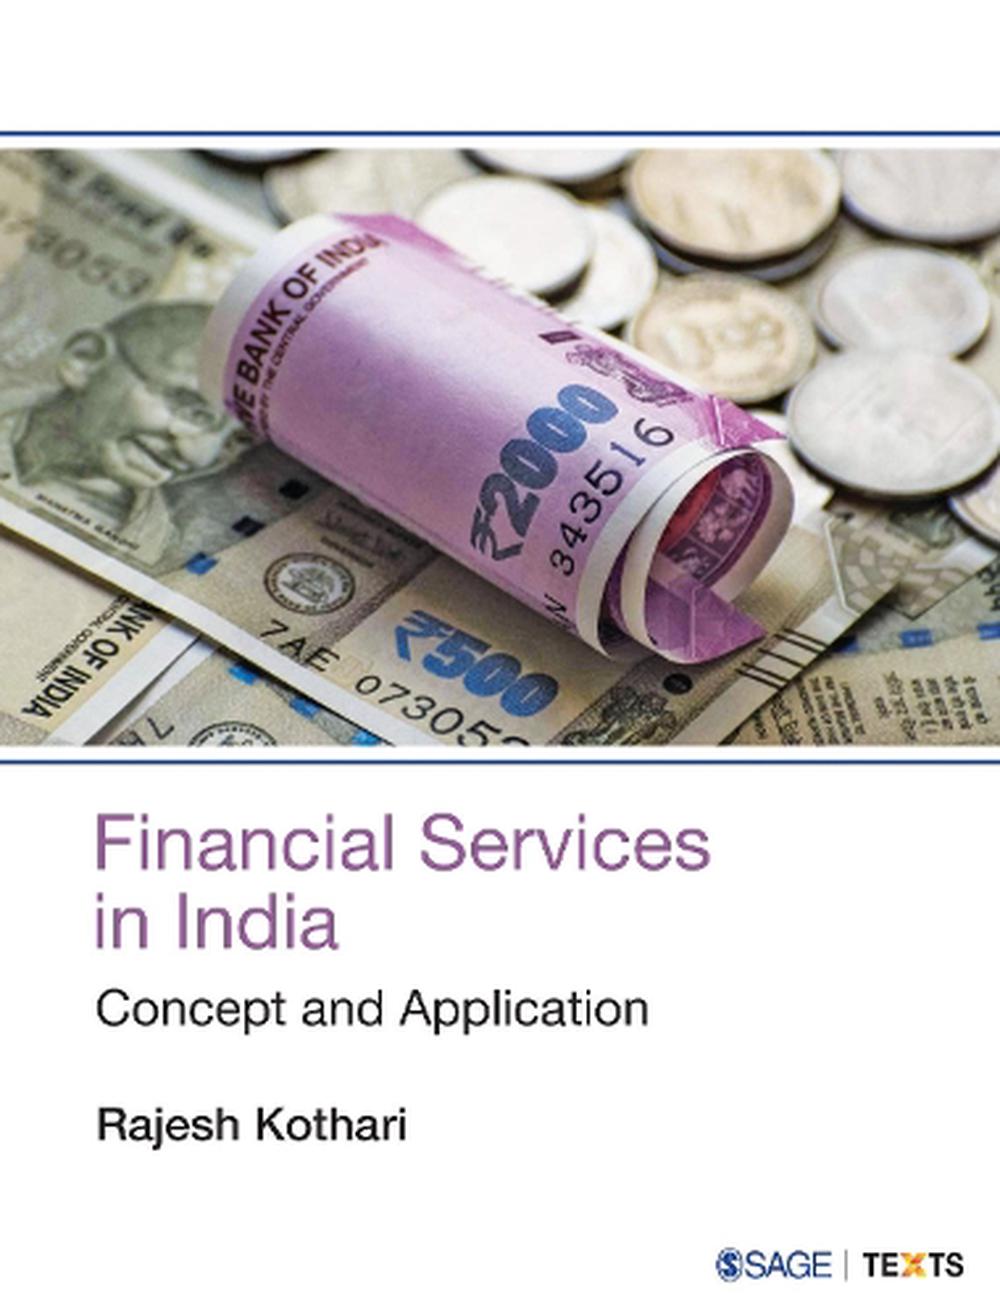 case study on financial services in india